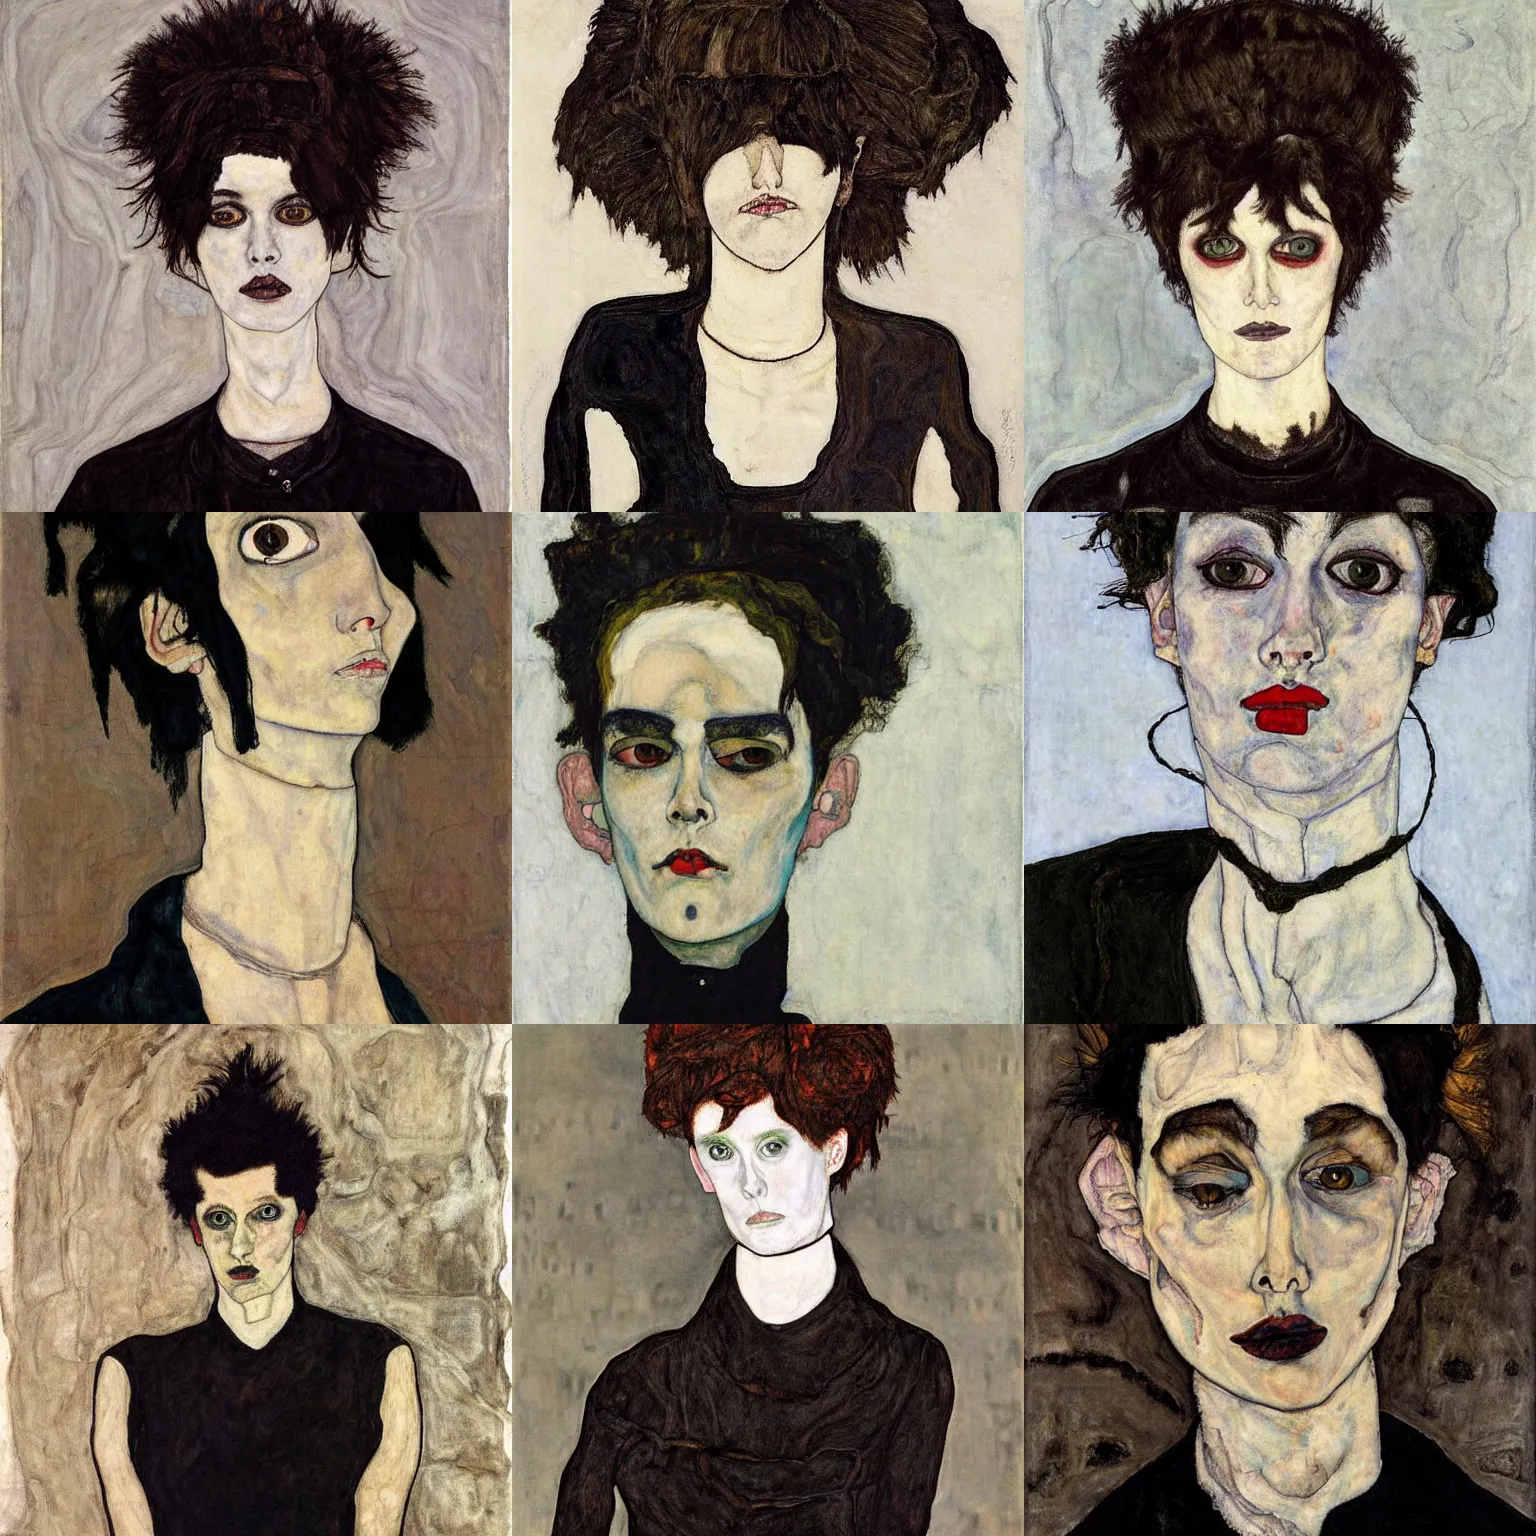 Prompt: A goth portrait painted by Egon Schiele. Her hair is dark brown and cut into a short, messy pixie cut. She has a slightly rounded face, with a pointed chin, large entirely-black eyes, and a small nose. She is wearing a black tank top, a black leather jacket, a black knee-length skirt, a black choker, and black leather boots.